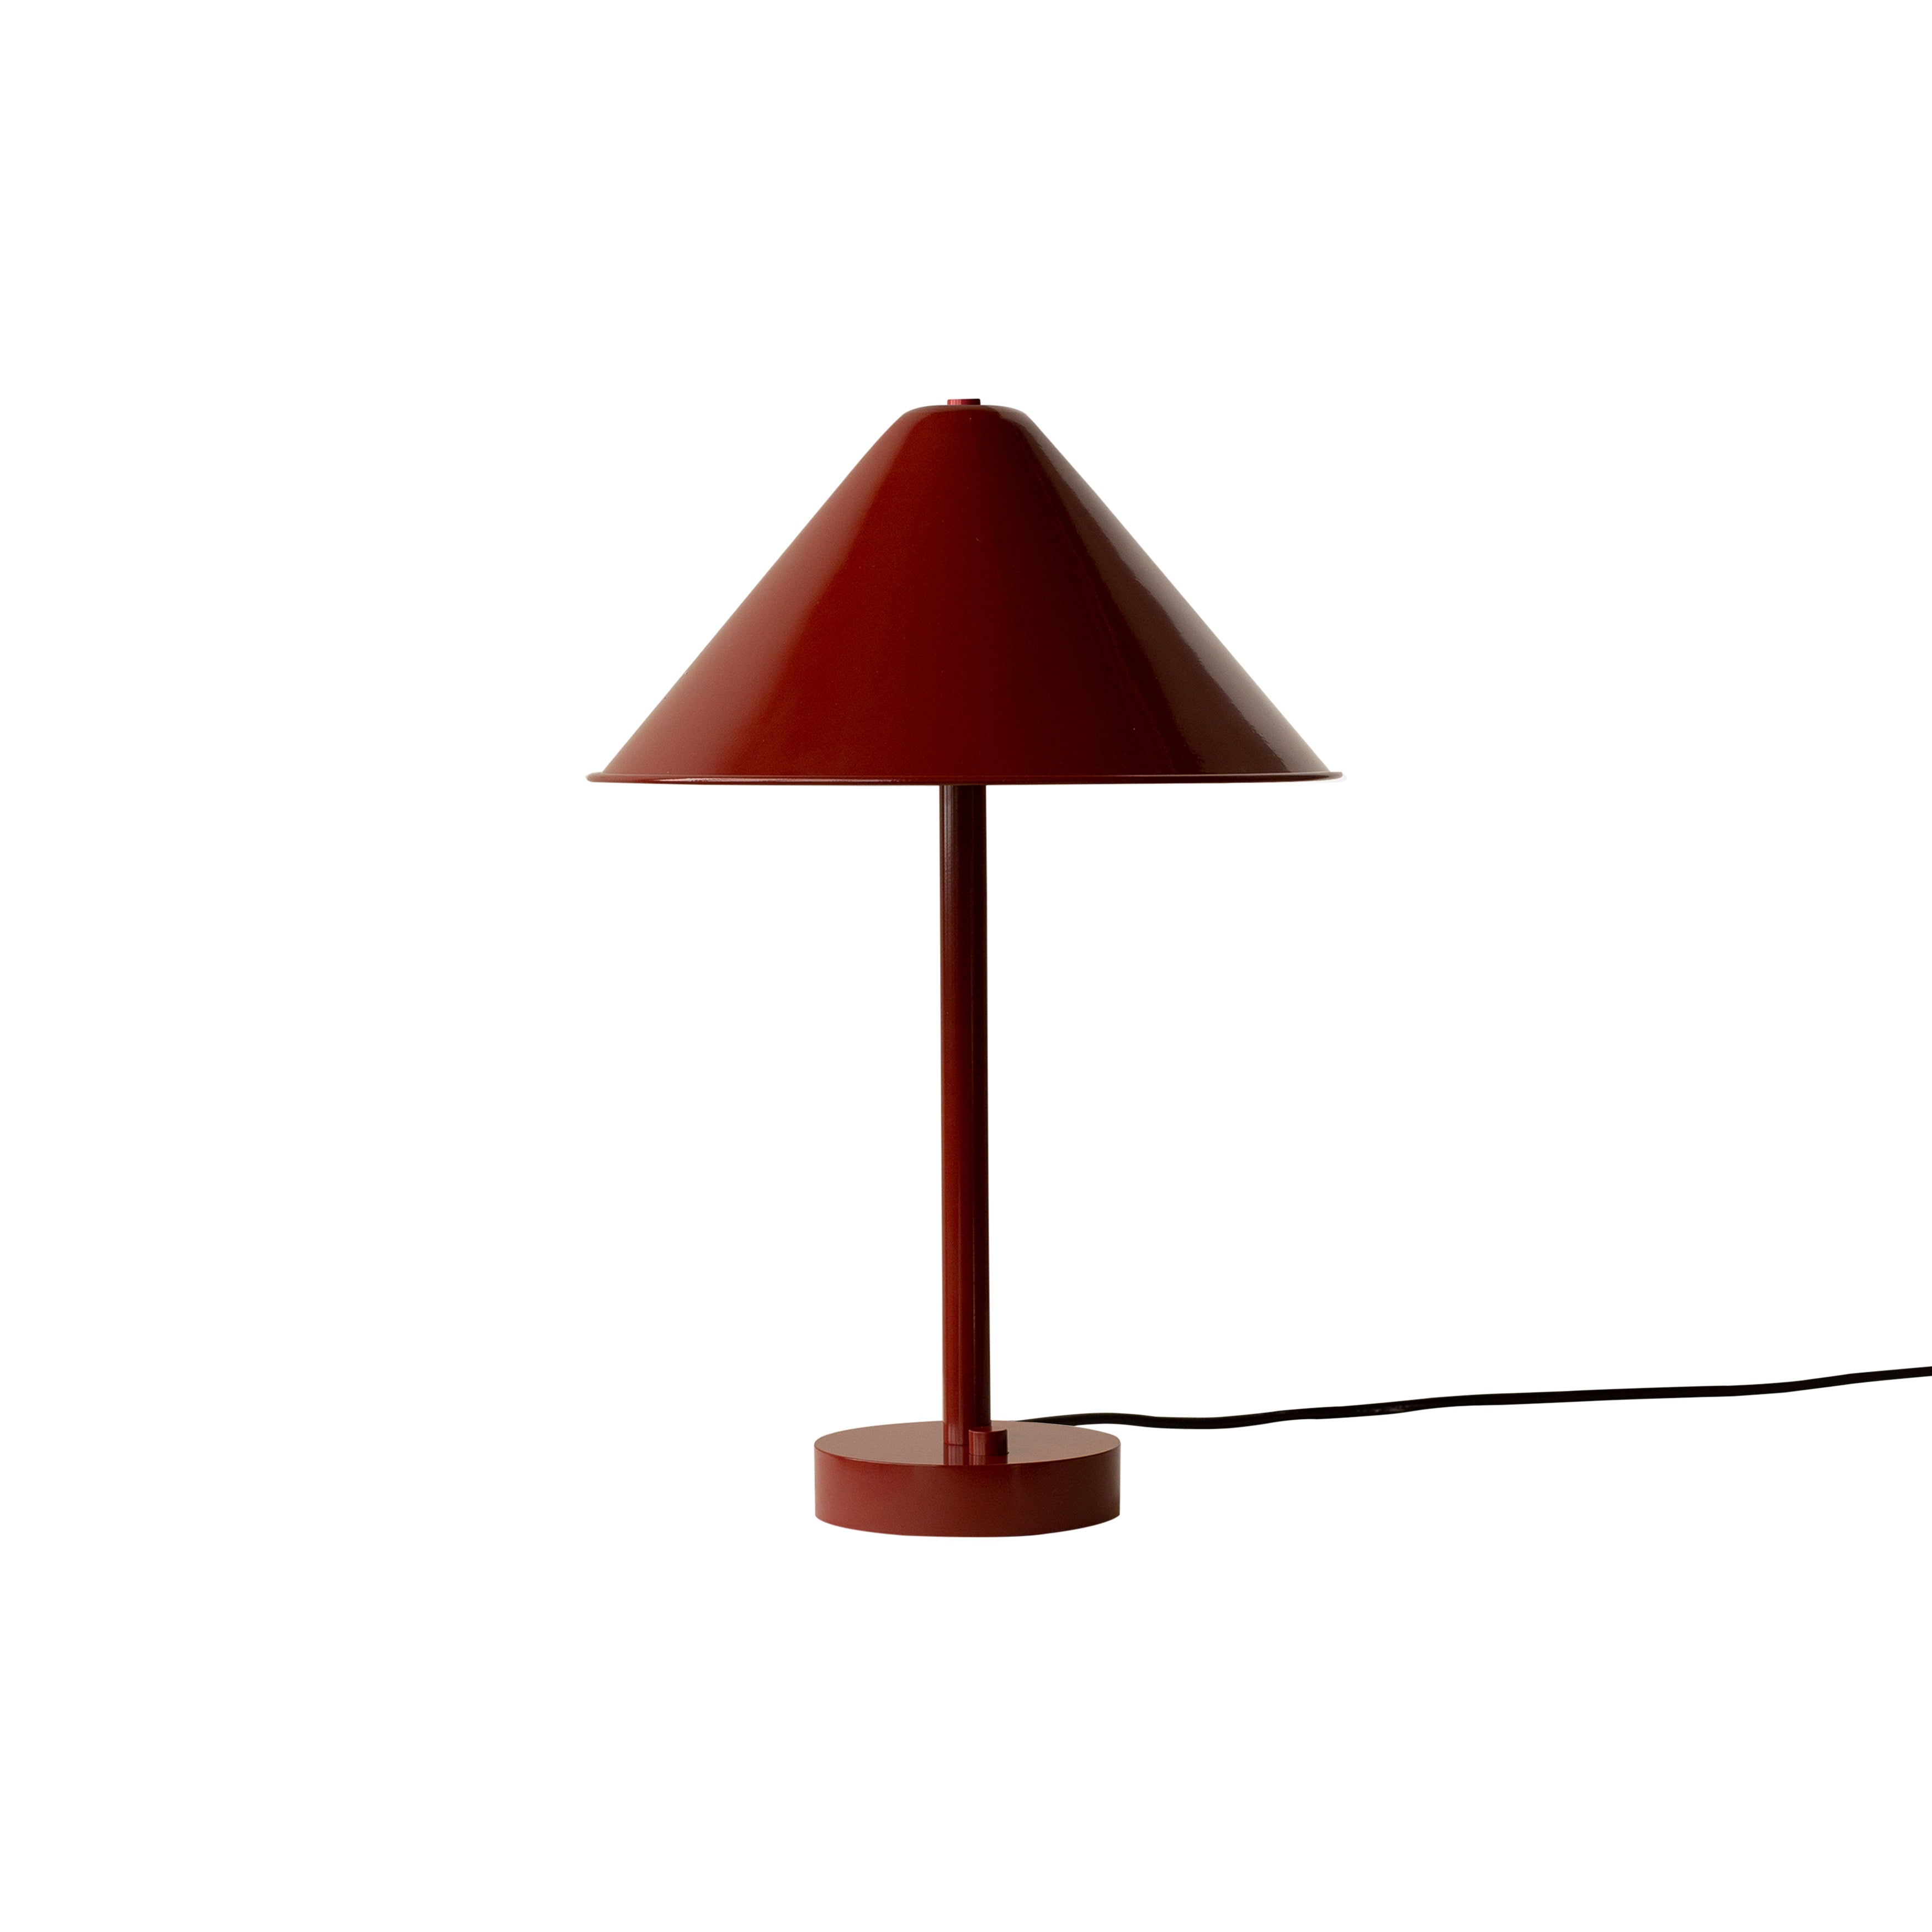 Eave Table Lamp: Oxide Red + Oxide Red